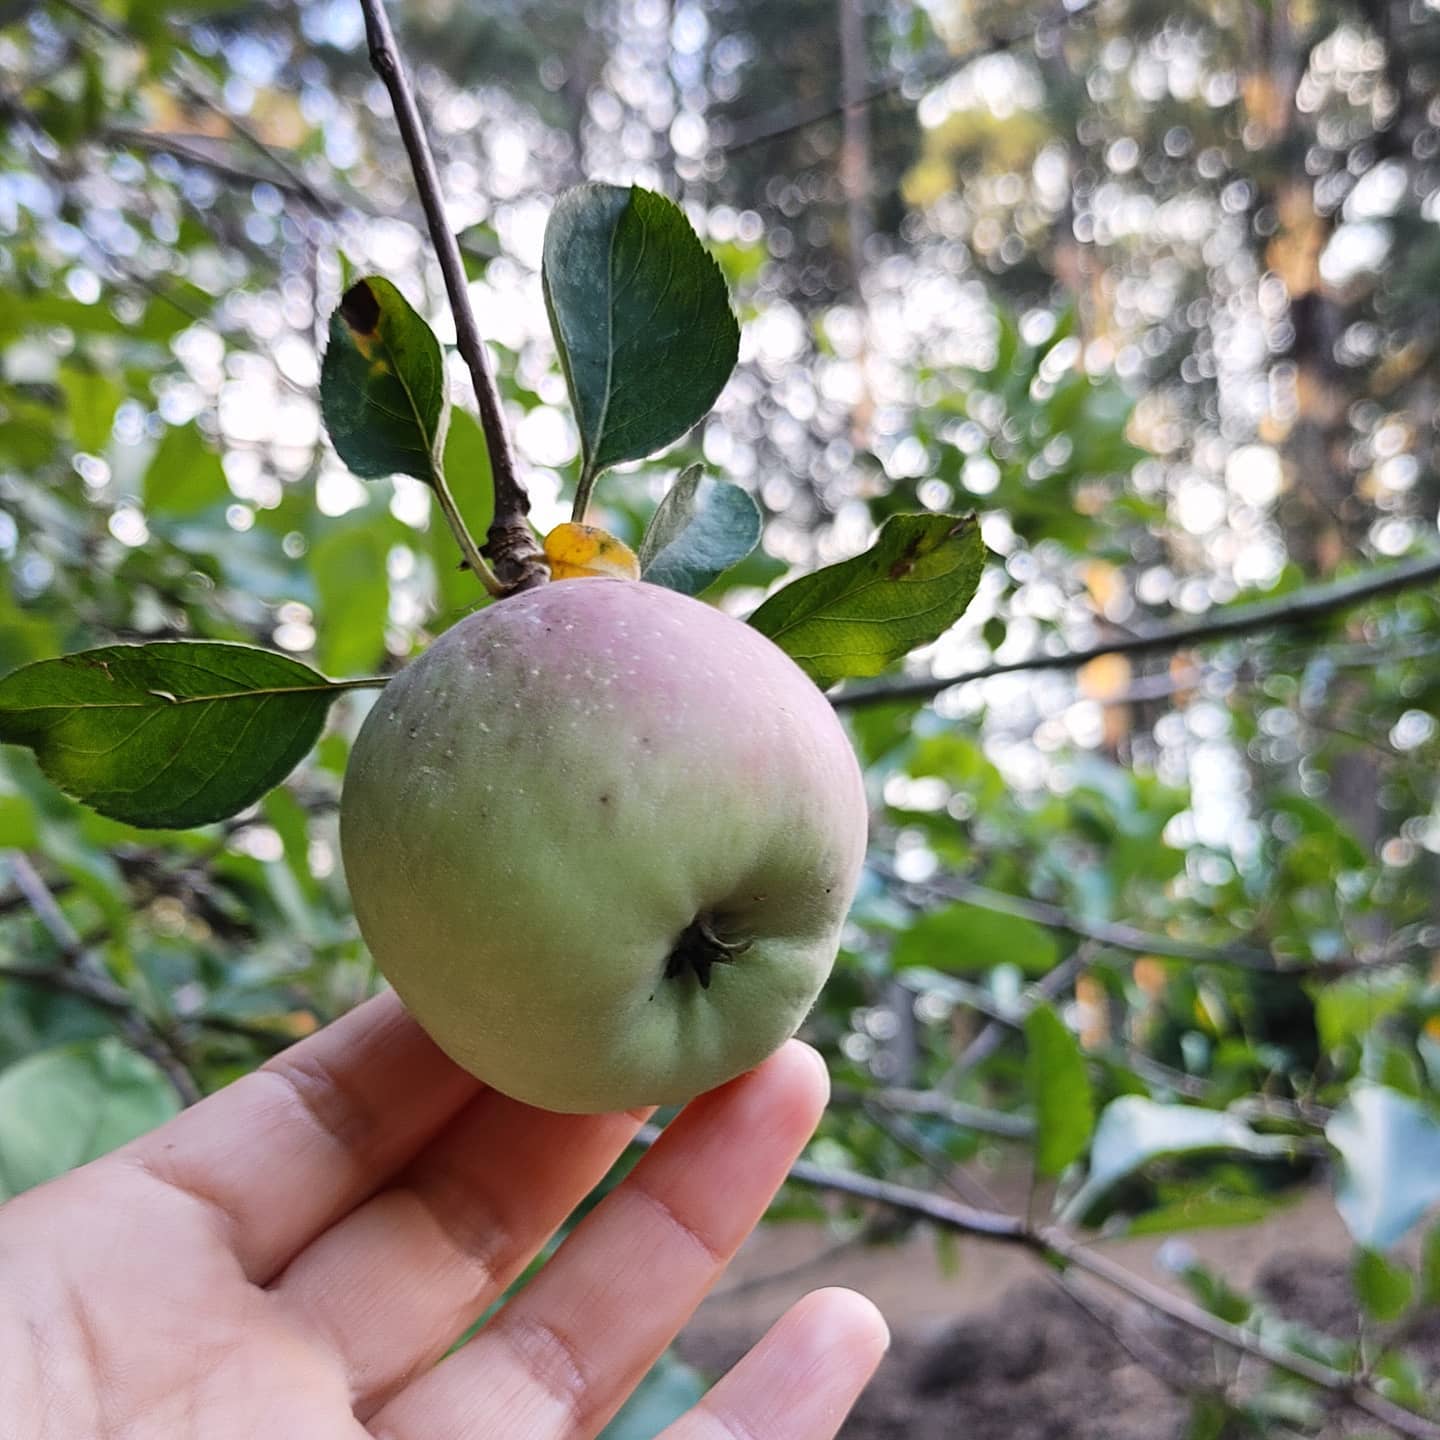 The apple tree  is trying much harder than usual this year. It must have heard me say I wanted it cut down. It can stay if I get to eat an apple this year and it is good, not gross.